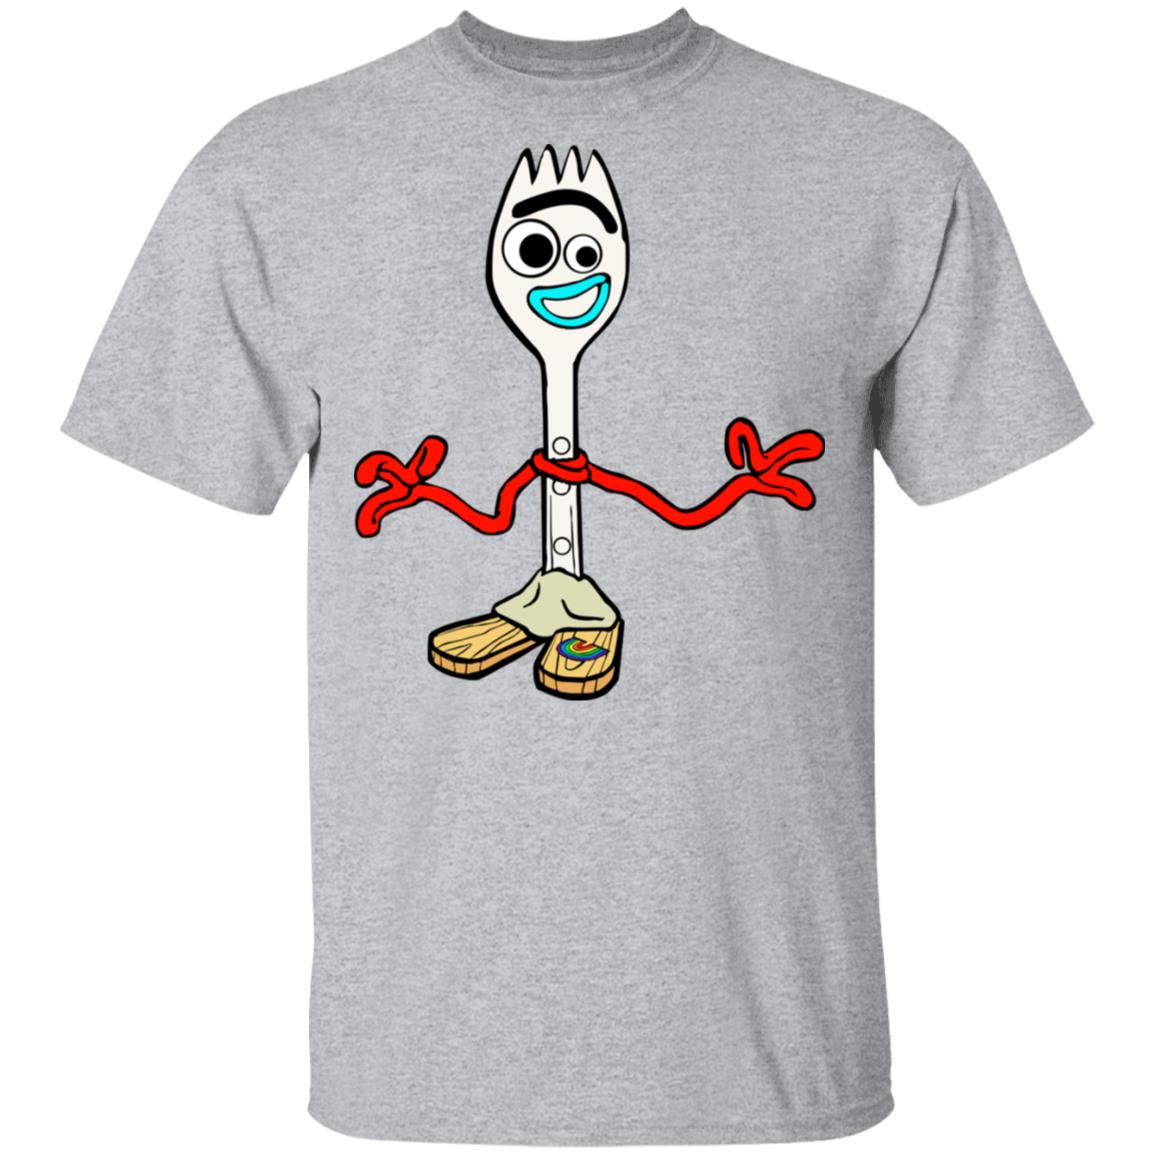 Toy Story 4 Tshirt Forky Toy Story 4' Men's T-Shirt